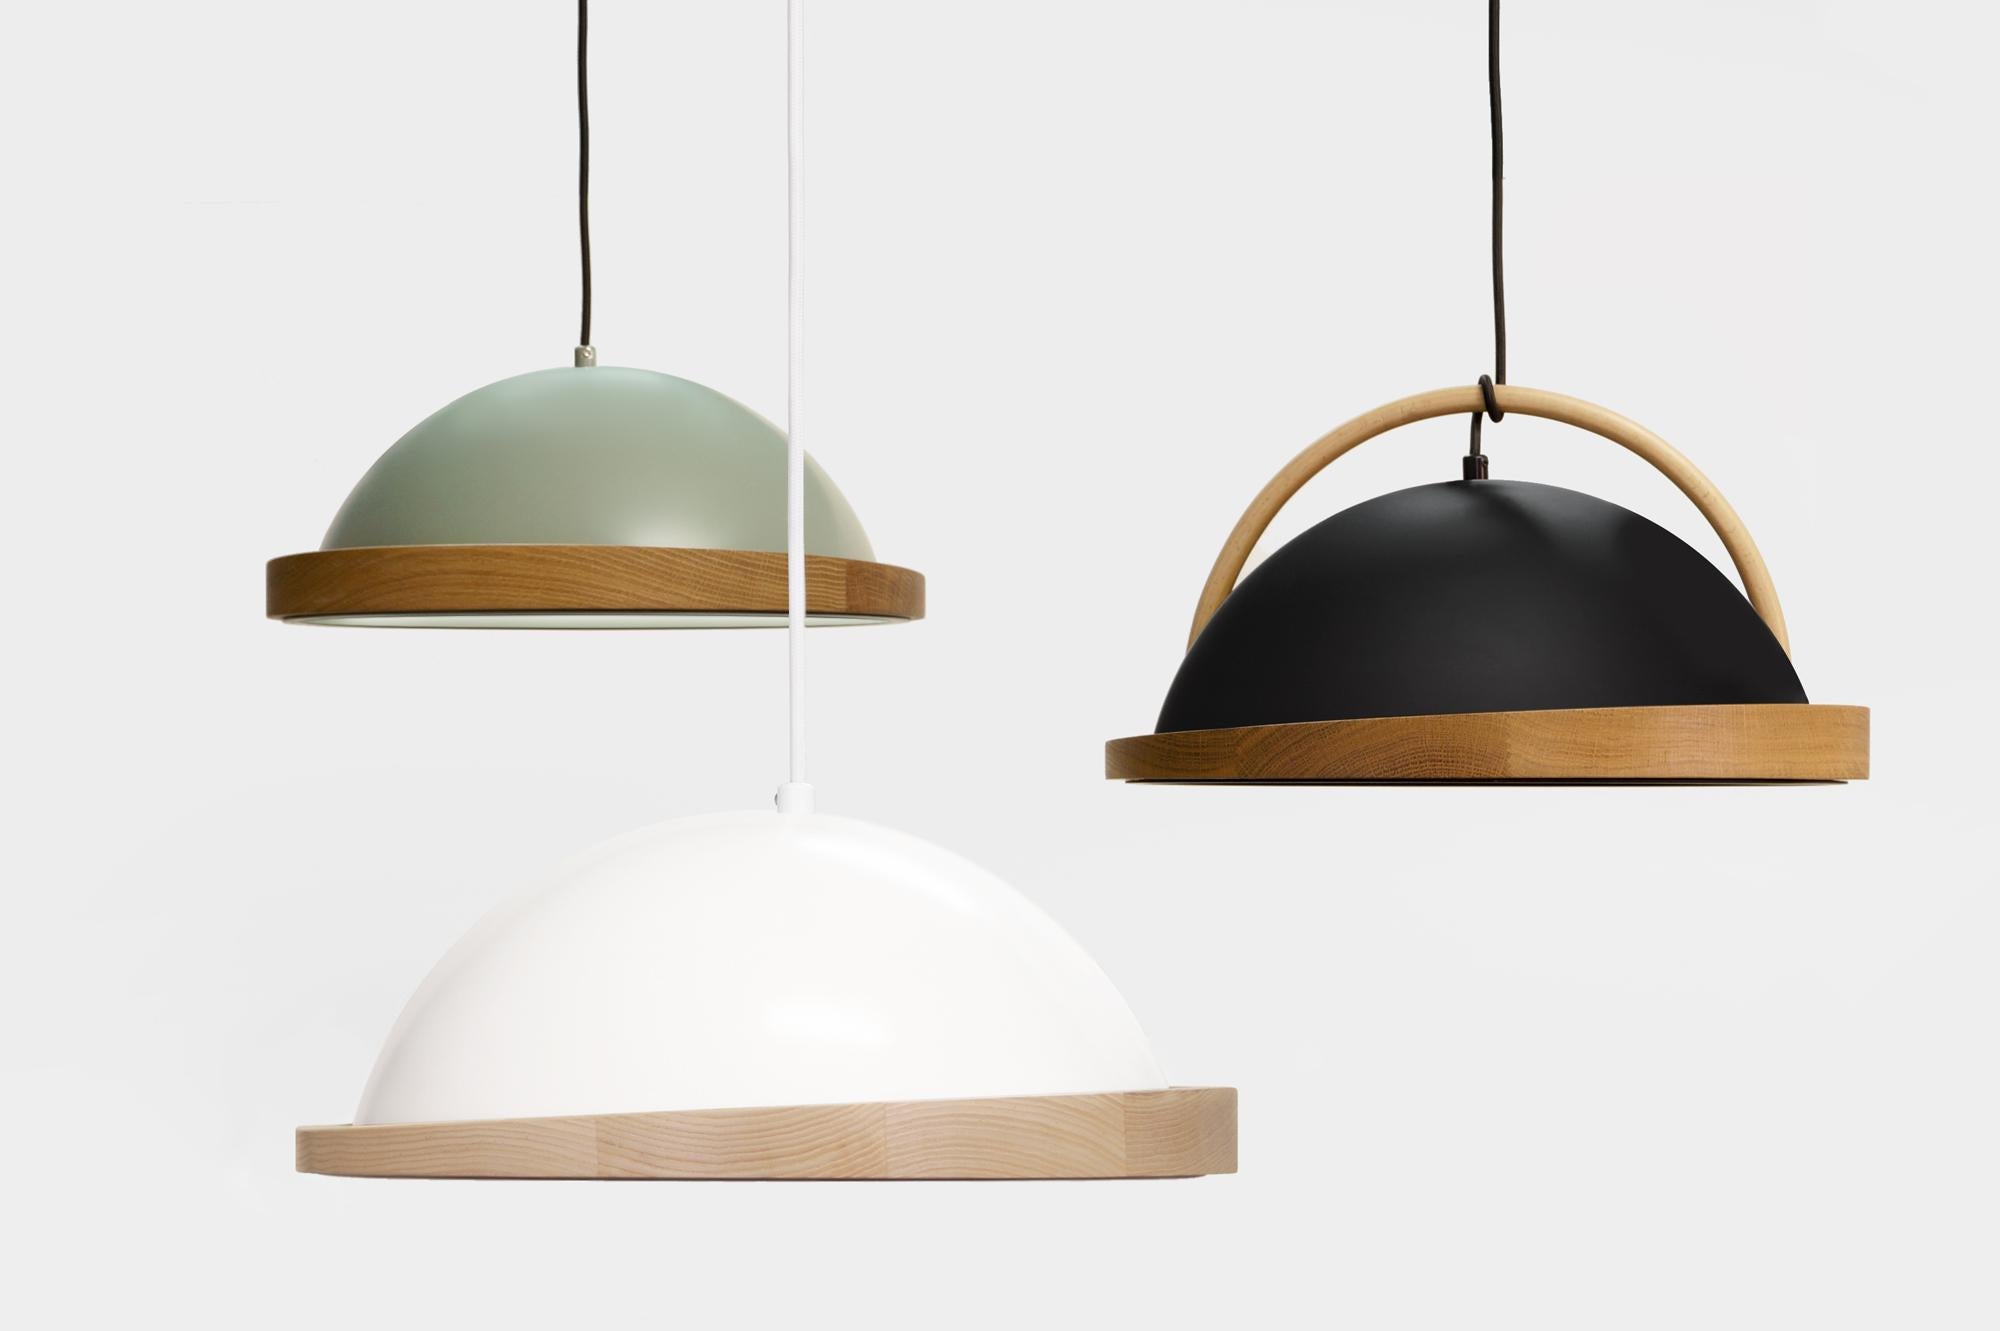 Obelia pendant lights are a collection of local artisan made spun aluminium lights with angled natural solid timber rims as their feature. With the additional bent timber arc and timber dowel, Obelia will hang cozily in all environments.

The